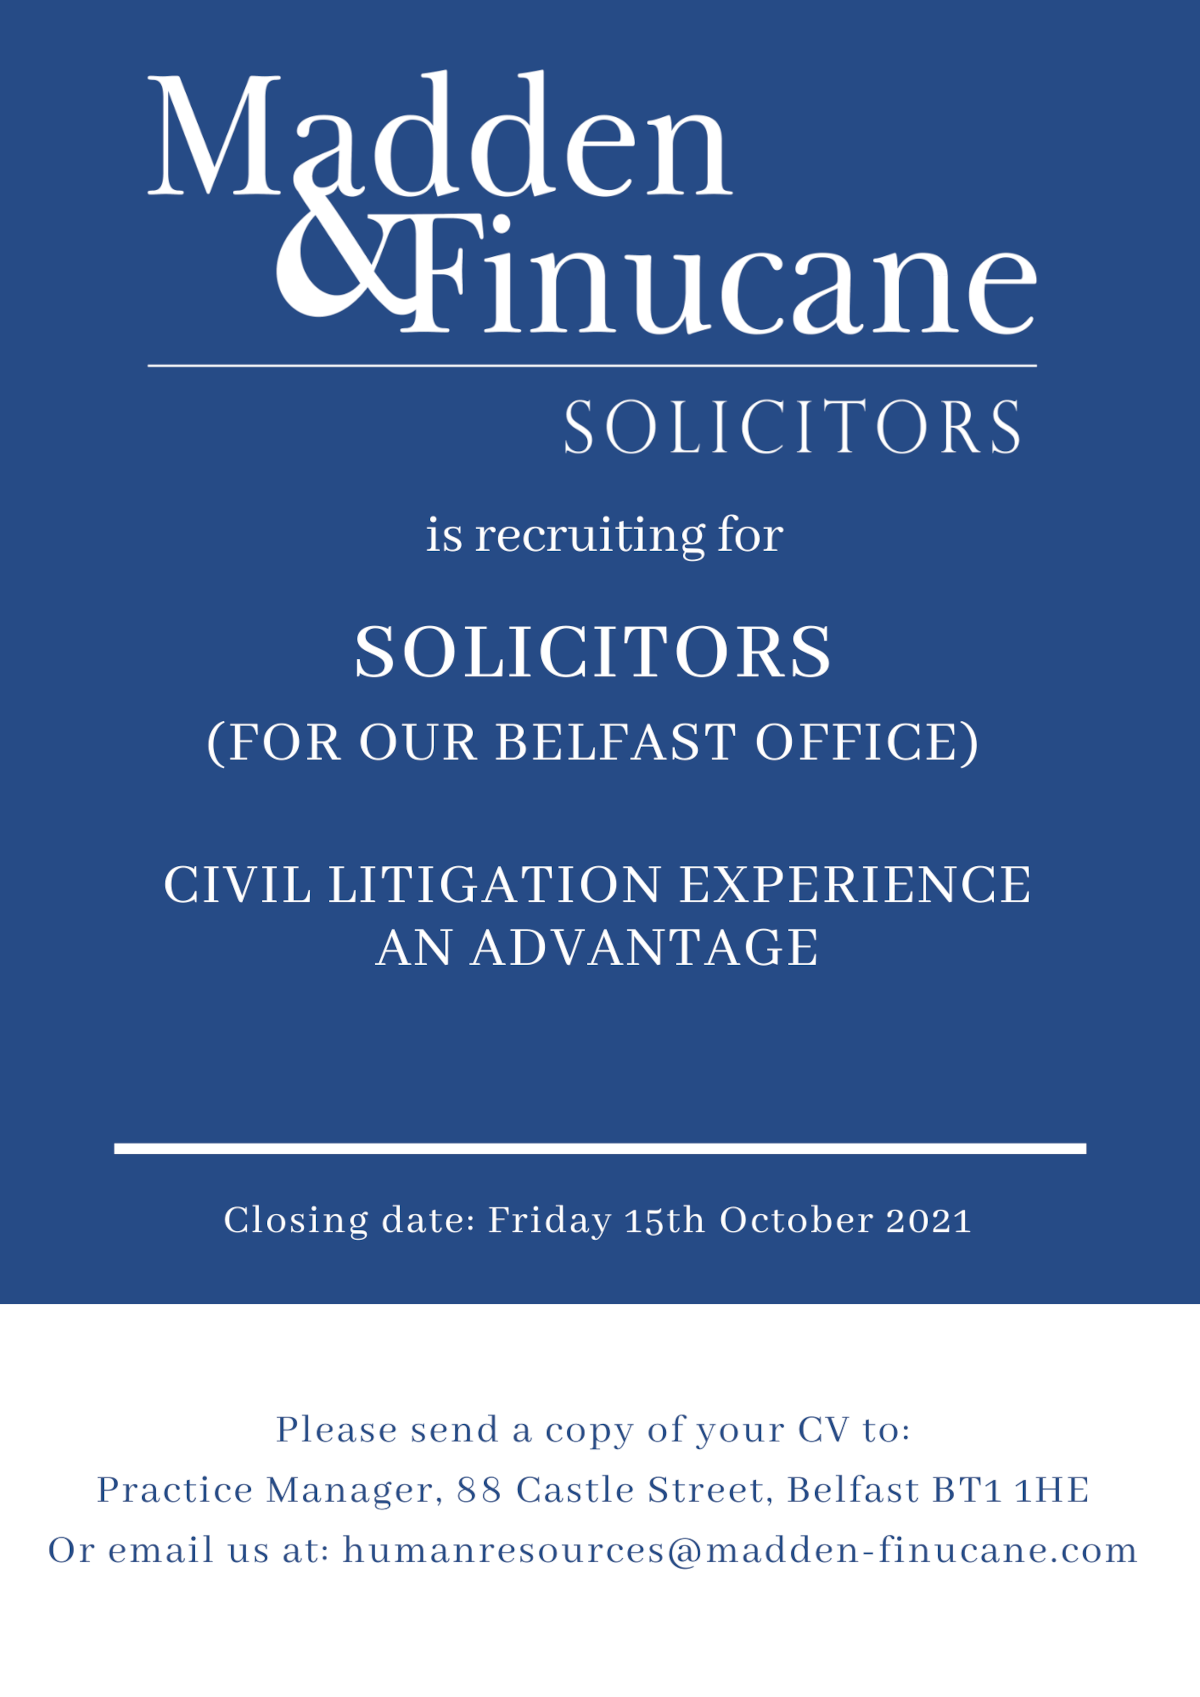 Solicitor Job Opportunities at Madden & Finucane Solicitors